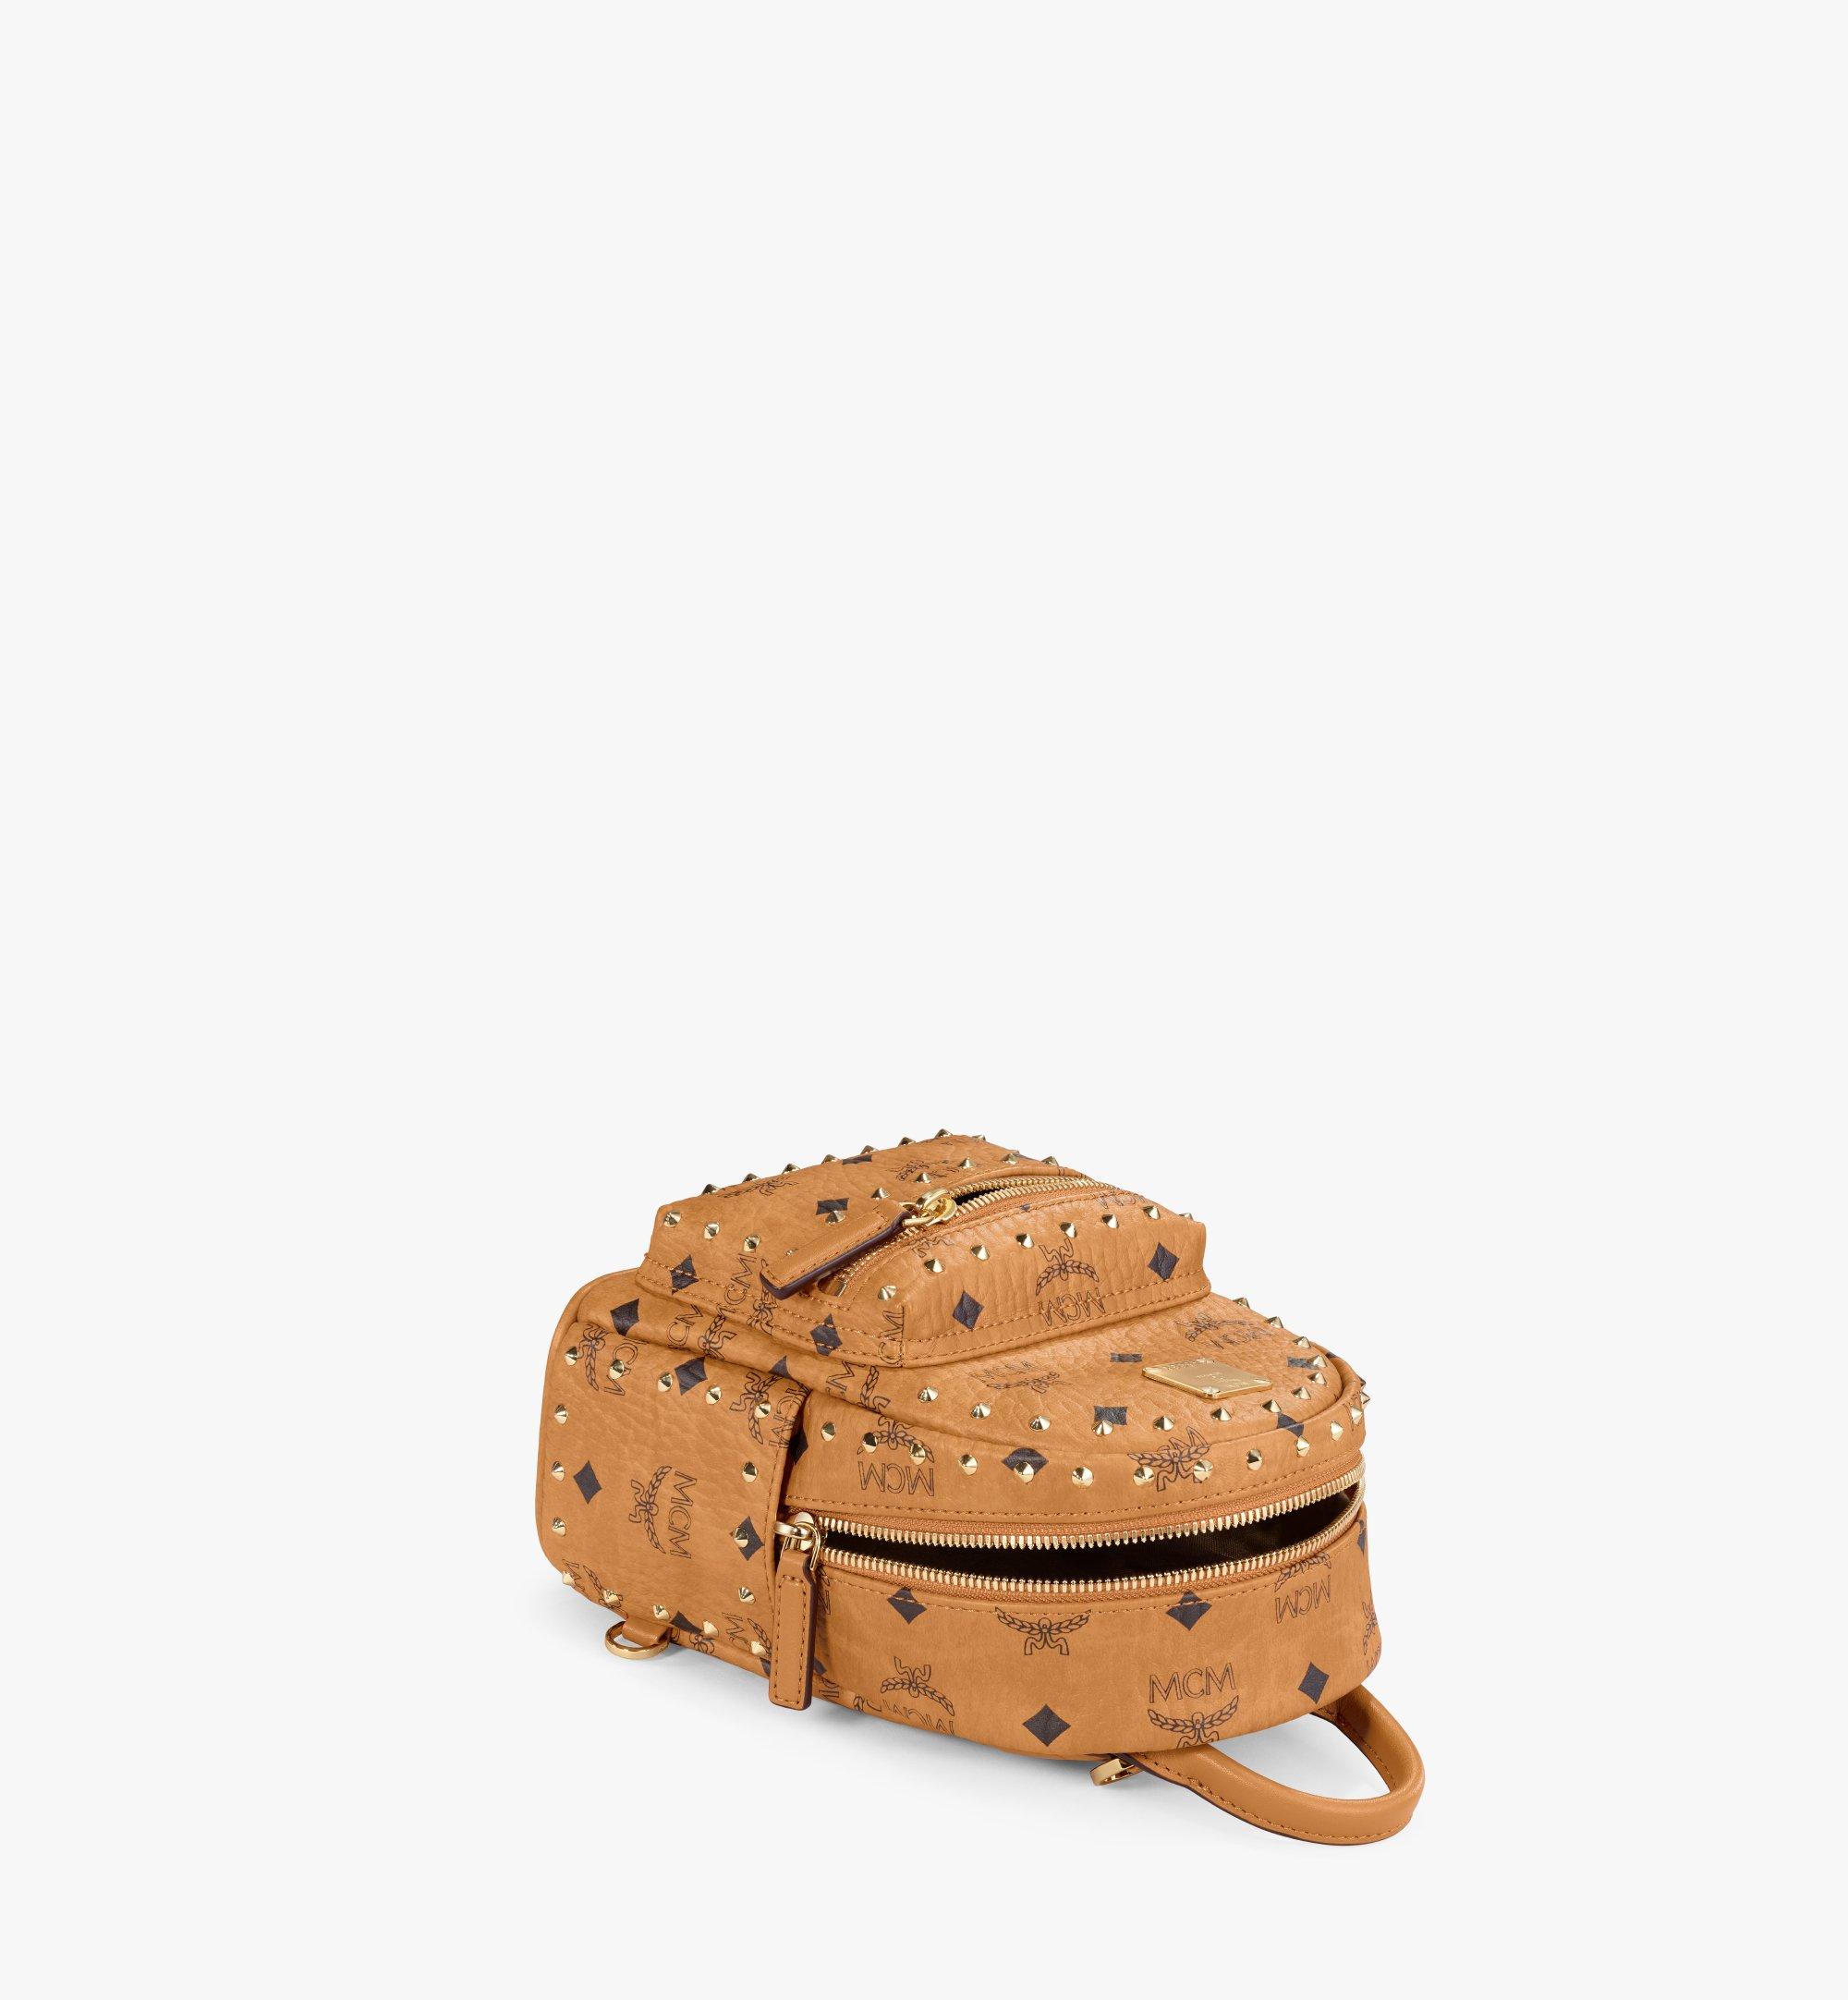 MCM Stark Bebe Boo Backpack in Studded Outline Visetos Cognac MMKAAVE05CO001 Alternate View 2